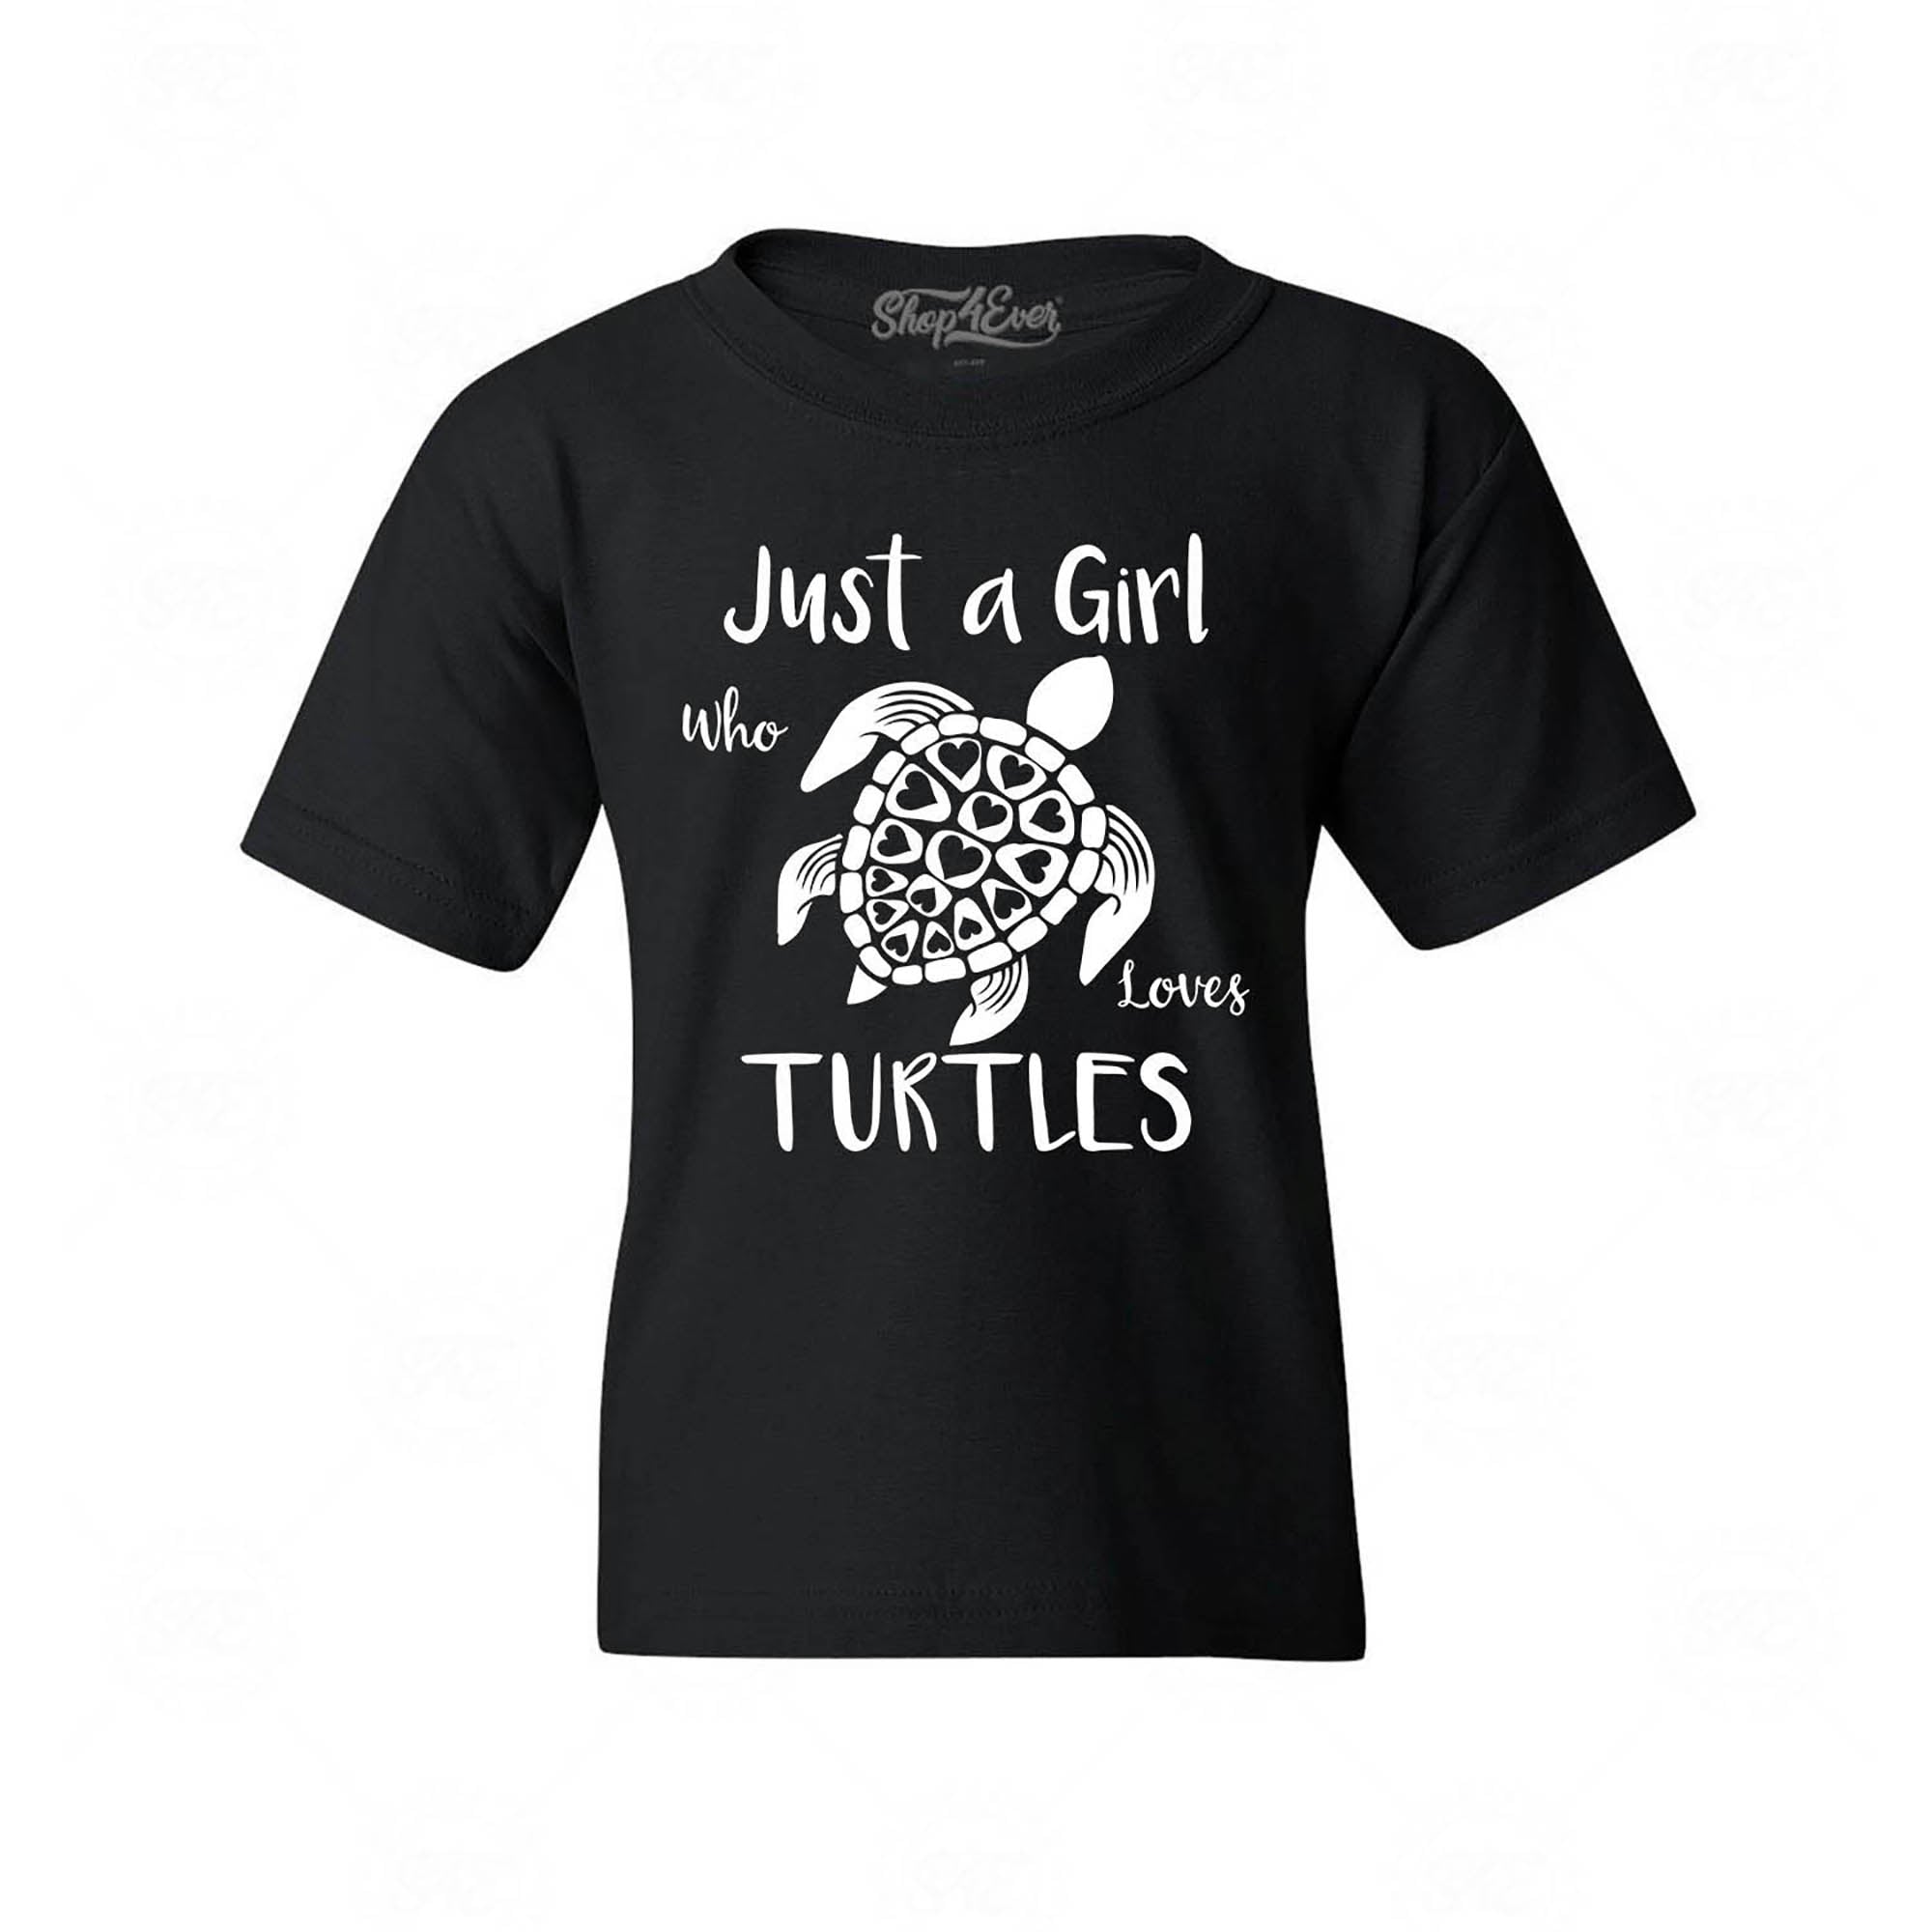 Just A Girl Who Loves Turtles Youth's T-Shirt